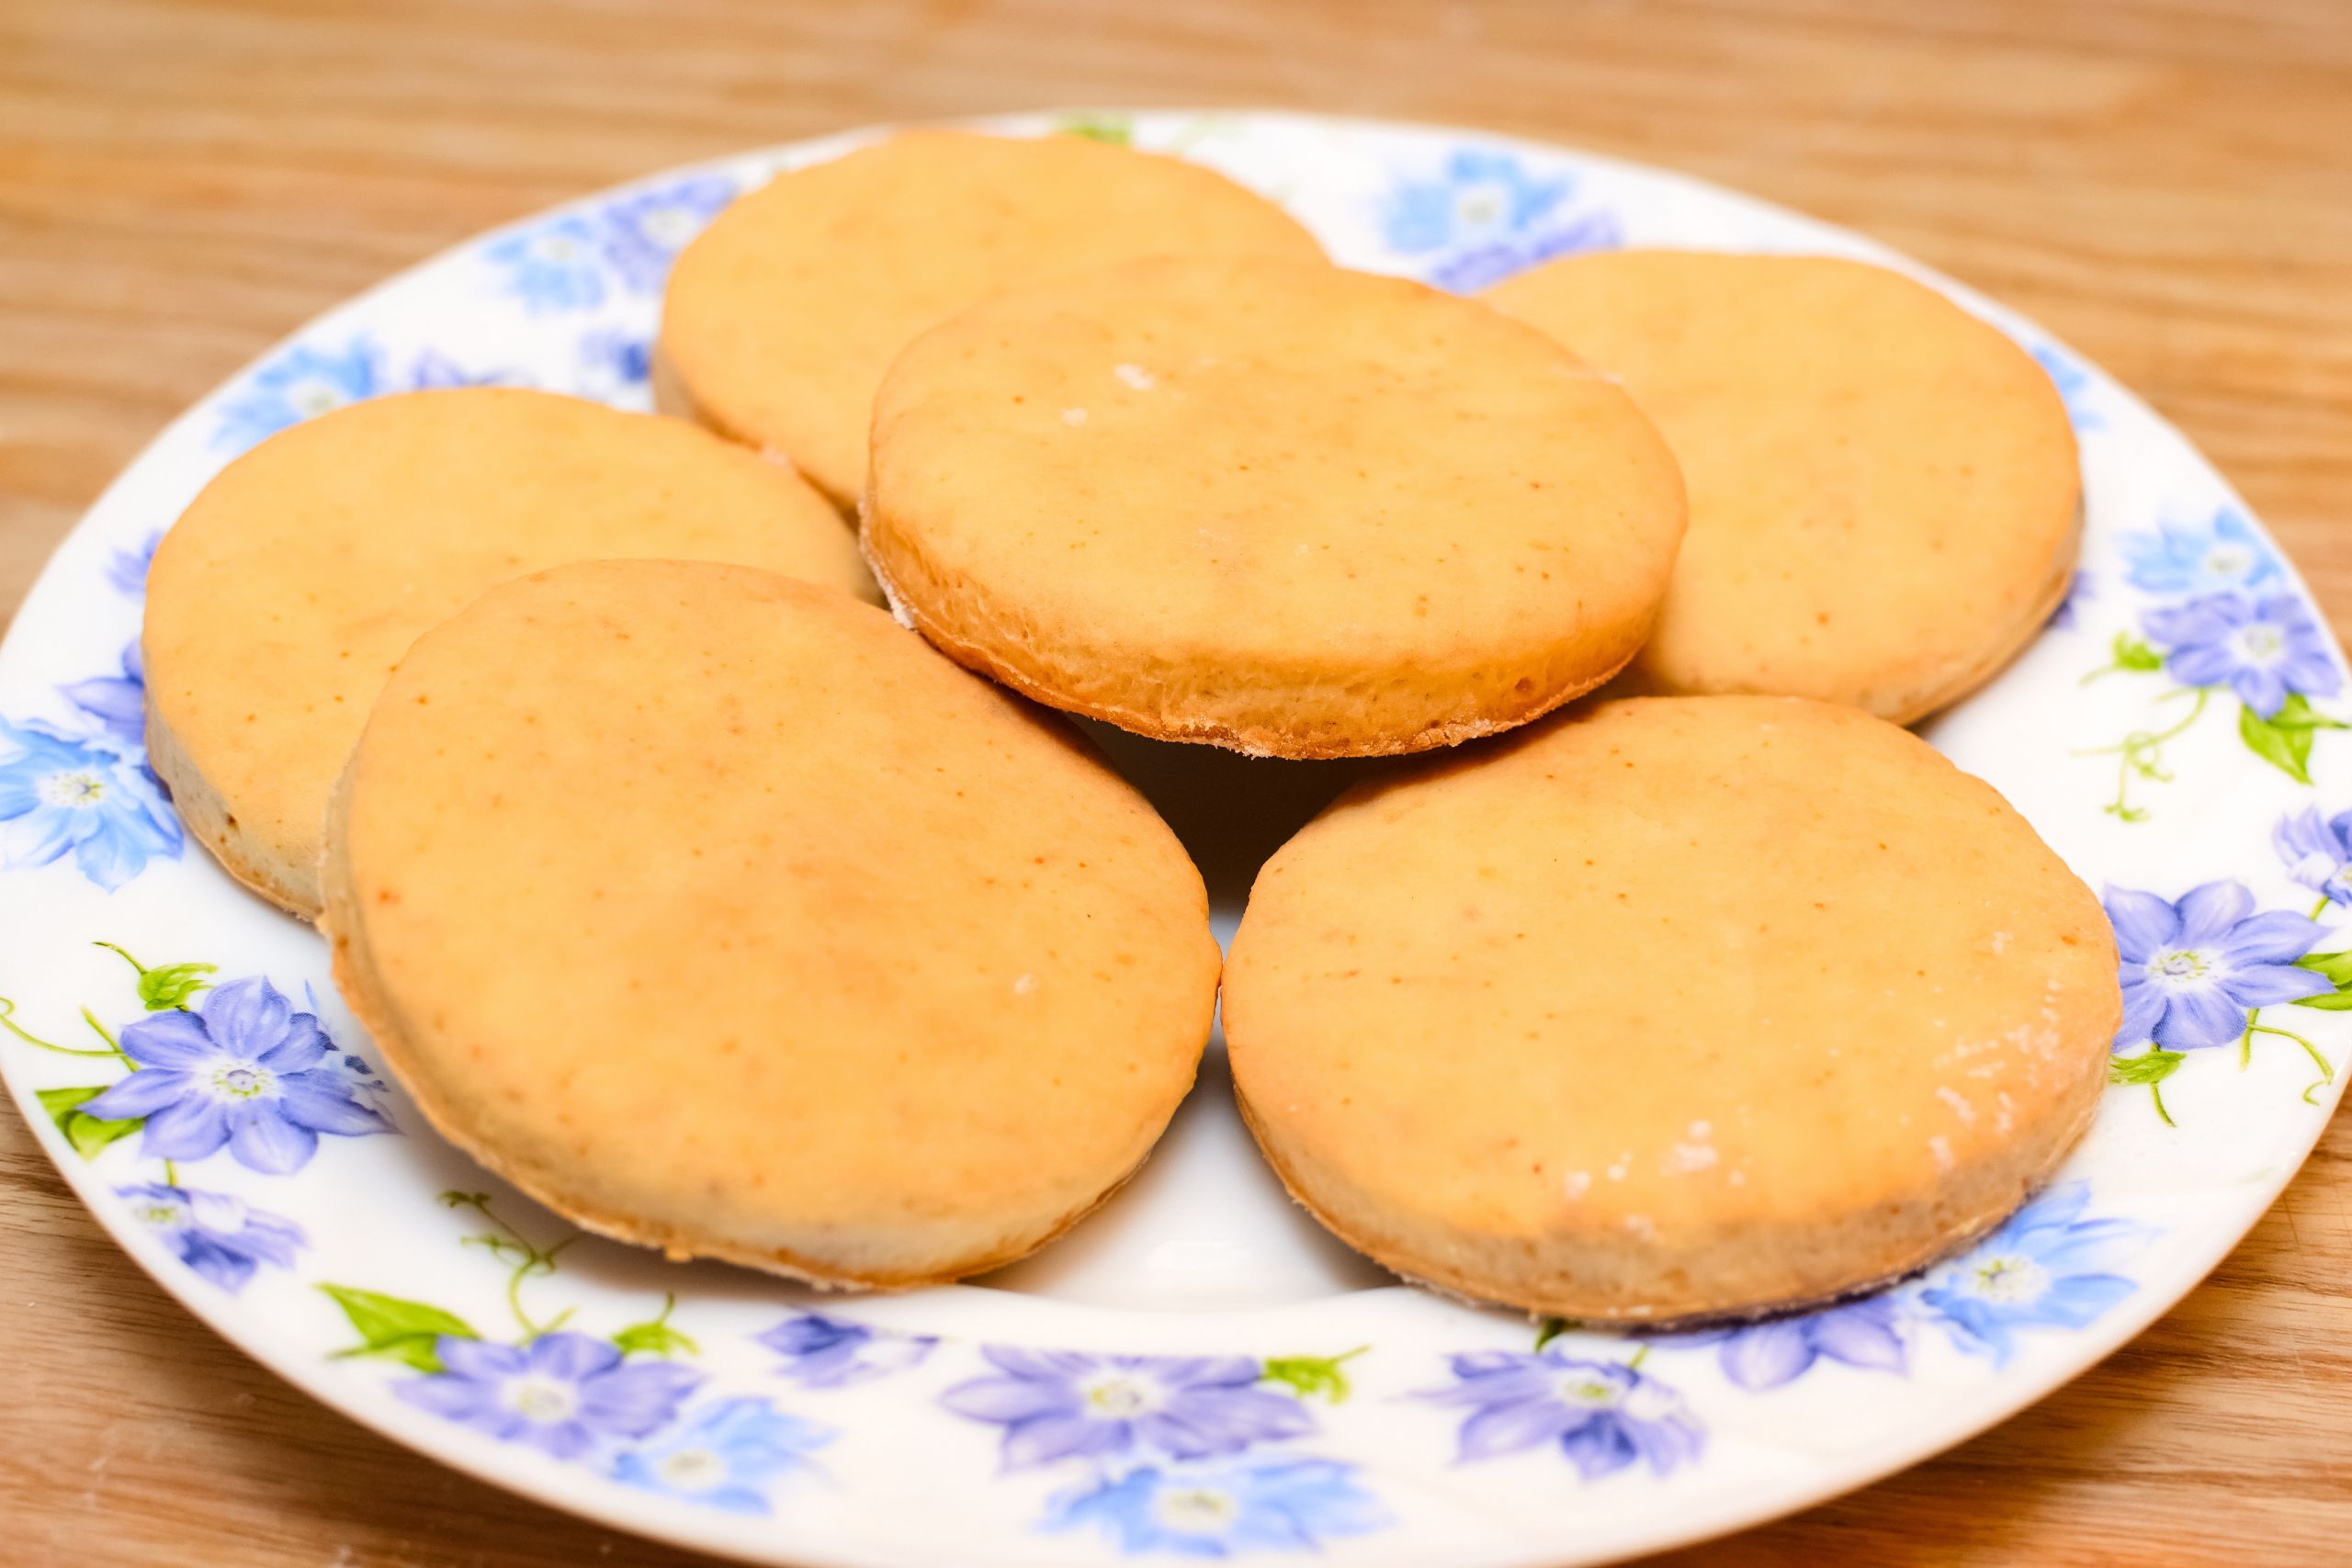 Baking soda Biscuit Recipe Beautiful How to Make Baking soda Biscuits 12 Steps with